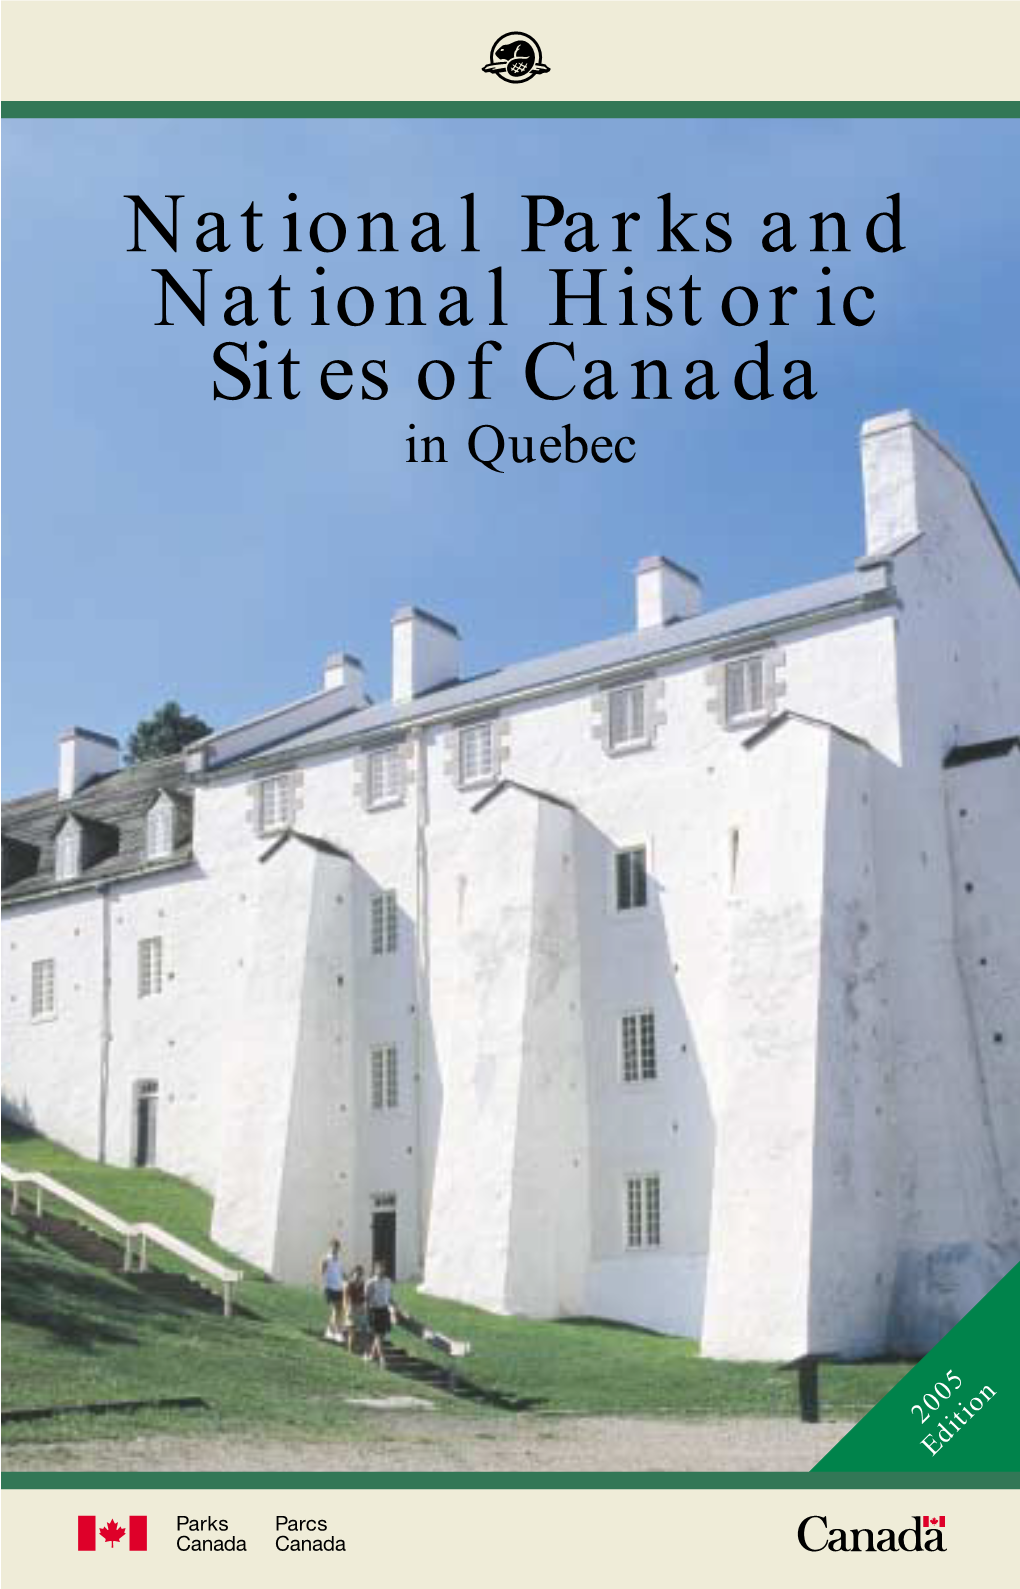 National Parks and National Historic Sites of Canada in Quebec